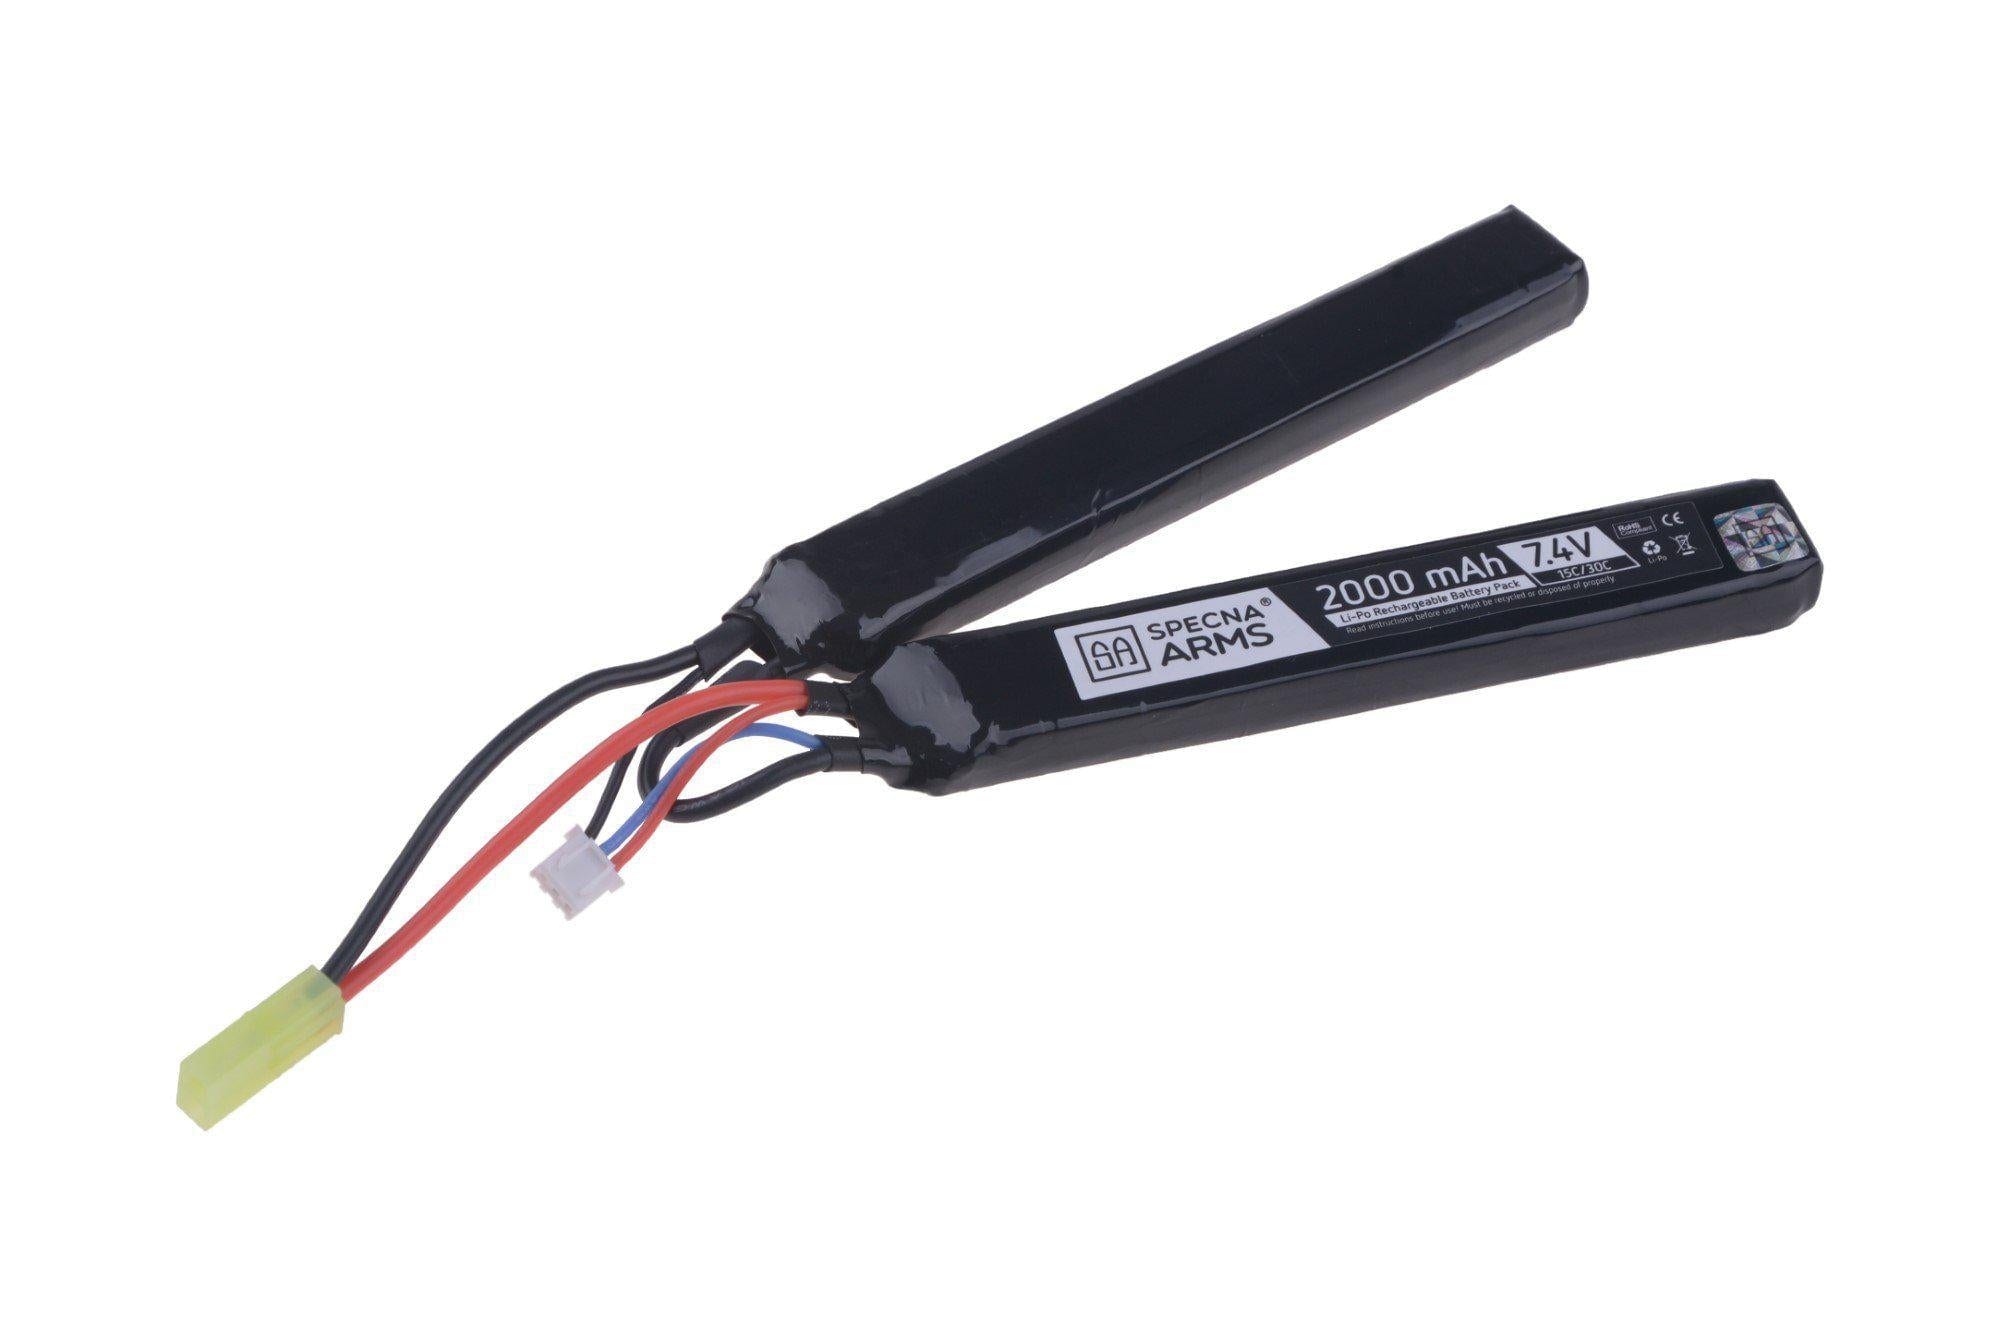 LiPo battery 7.4V 2000mAh 15 / 30C - Module 2 by Specna Arms on Airsoft Mania Europe